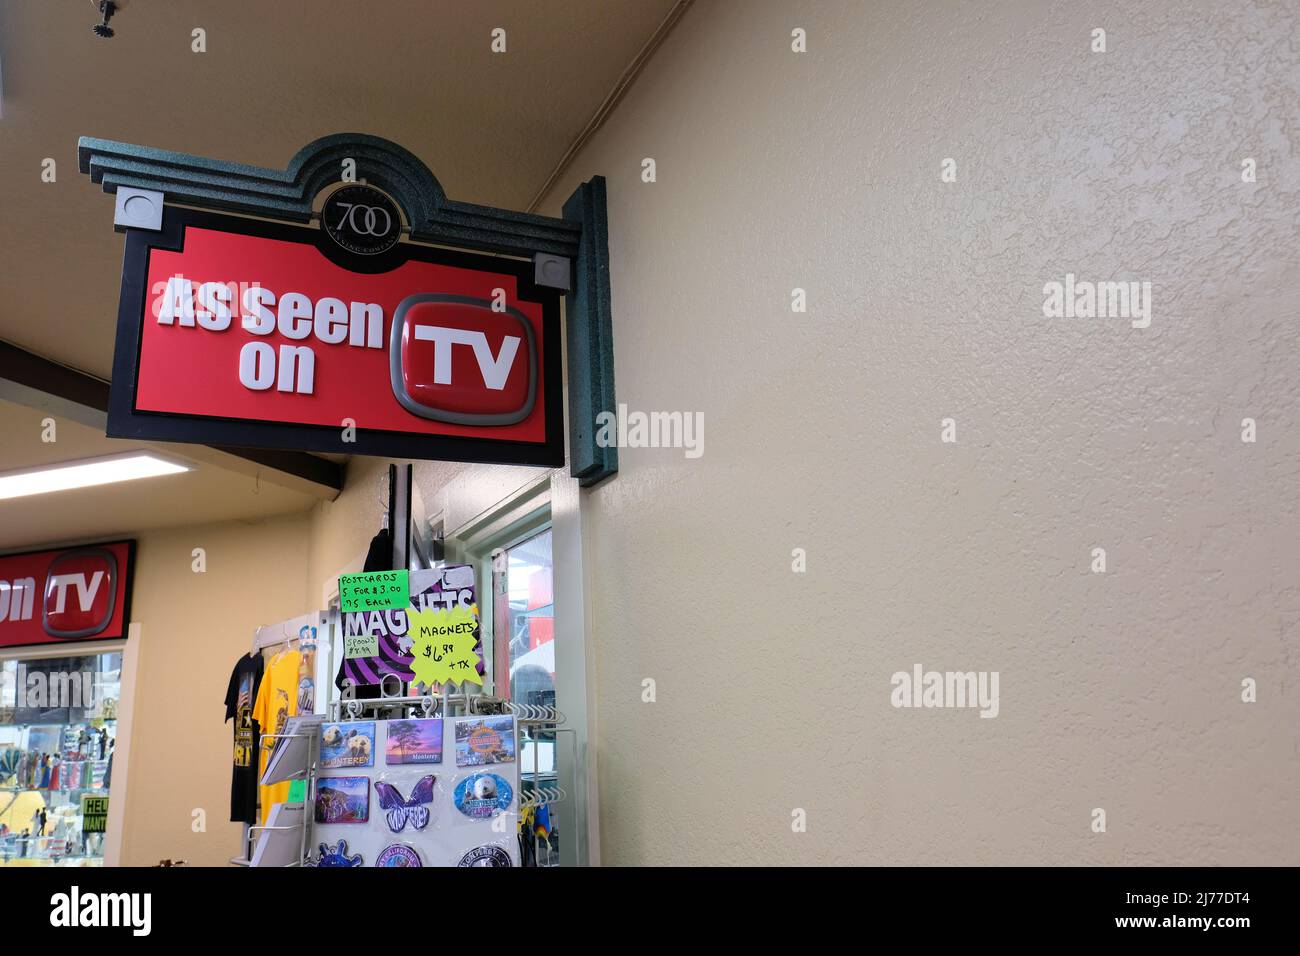 https://c8.alamy.com/comp/2J77DT4/as-seen-on-tv-retail-shop-sign-at-the-entrance-to-a-store-selling-products-advertised-on-television-through-infomercials-as-seen-on-tv-brand-name-2J77DT4.jpg